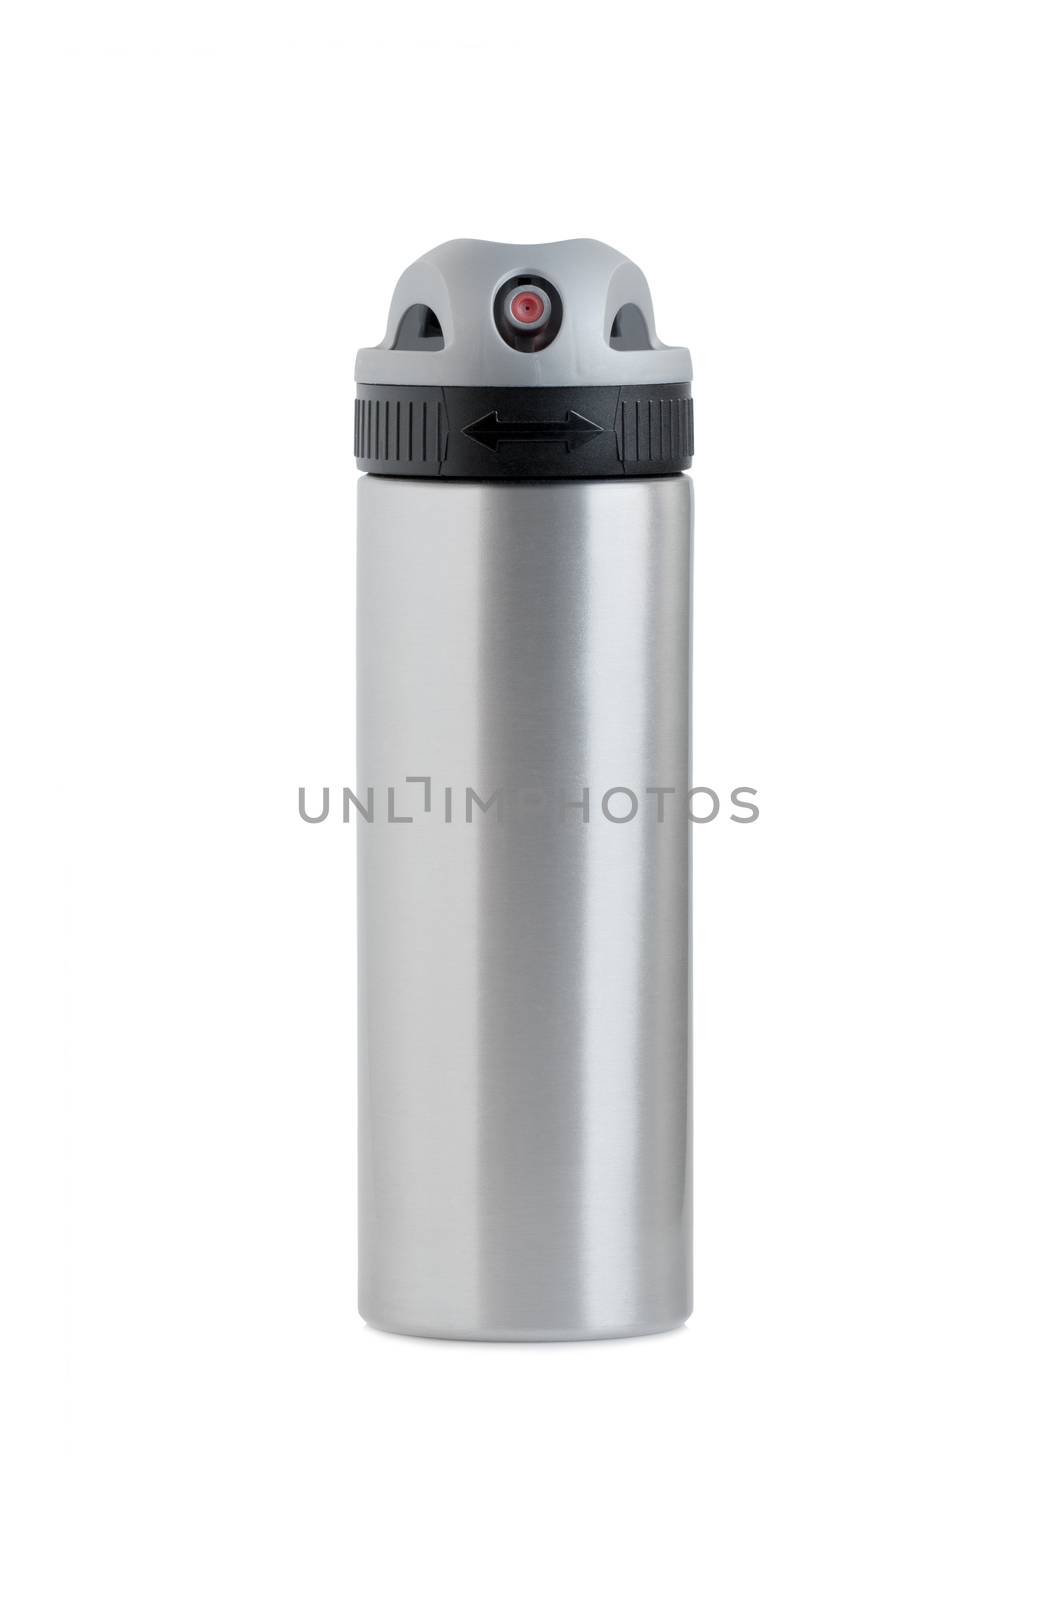 Aluminum bottle Spray with Spray nozzle switch lock On&Off, isolated on white background